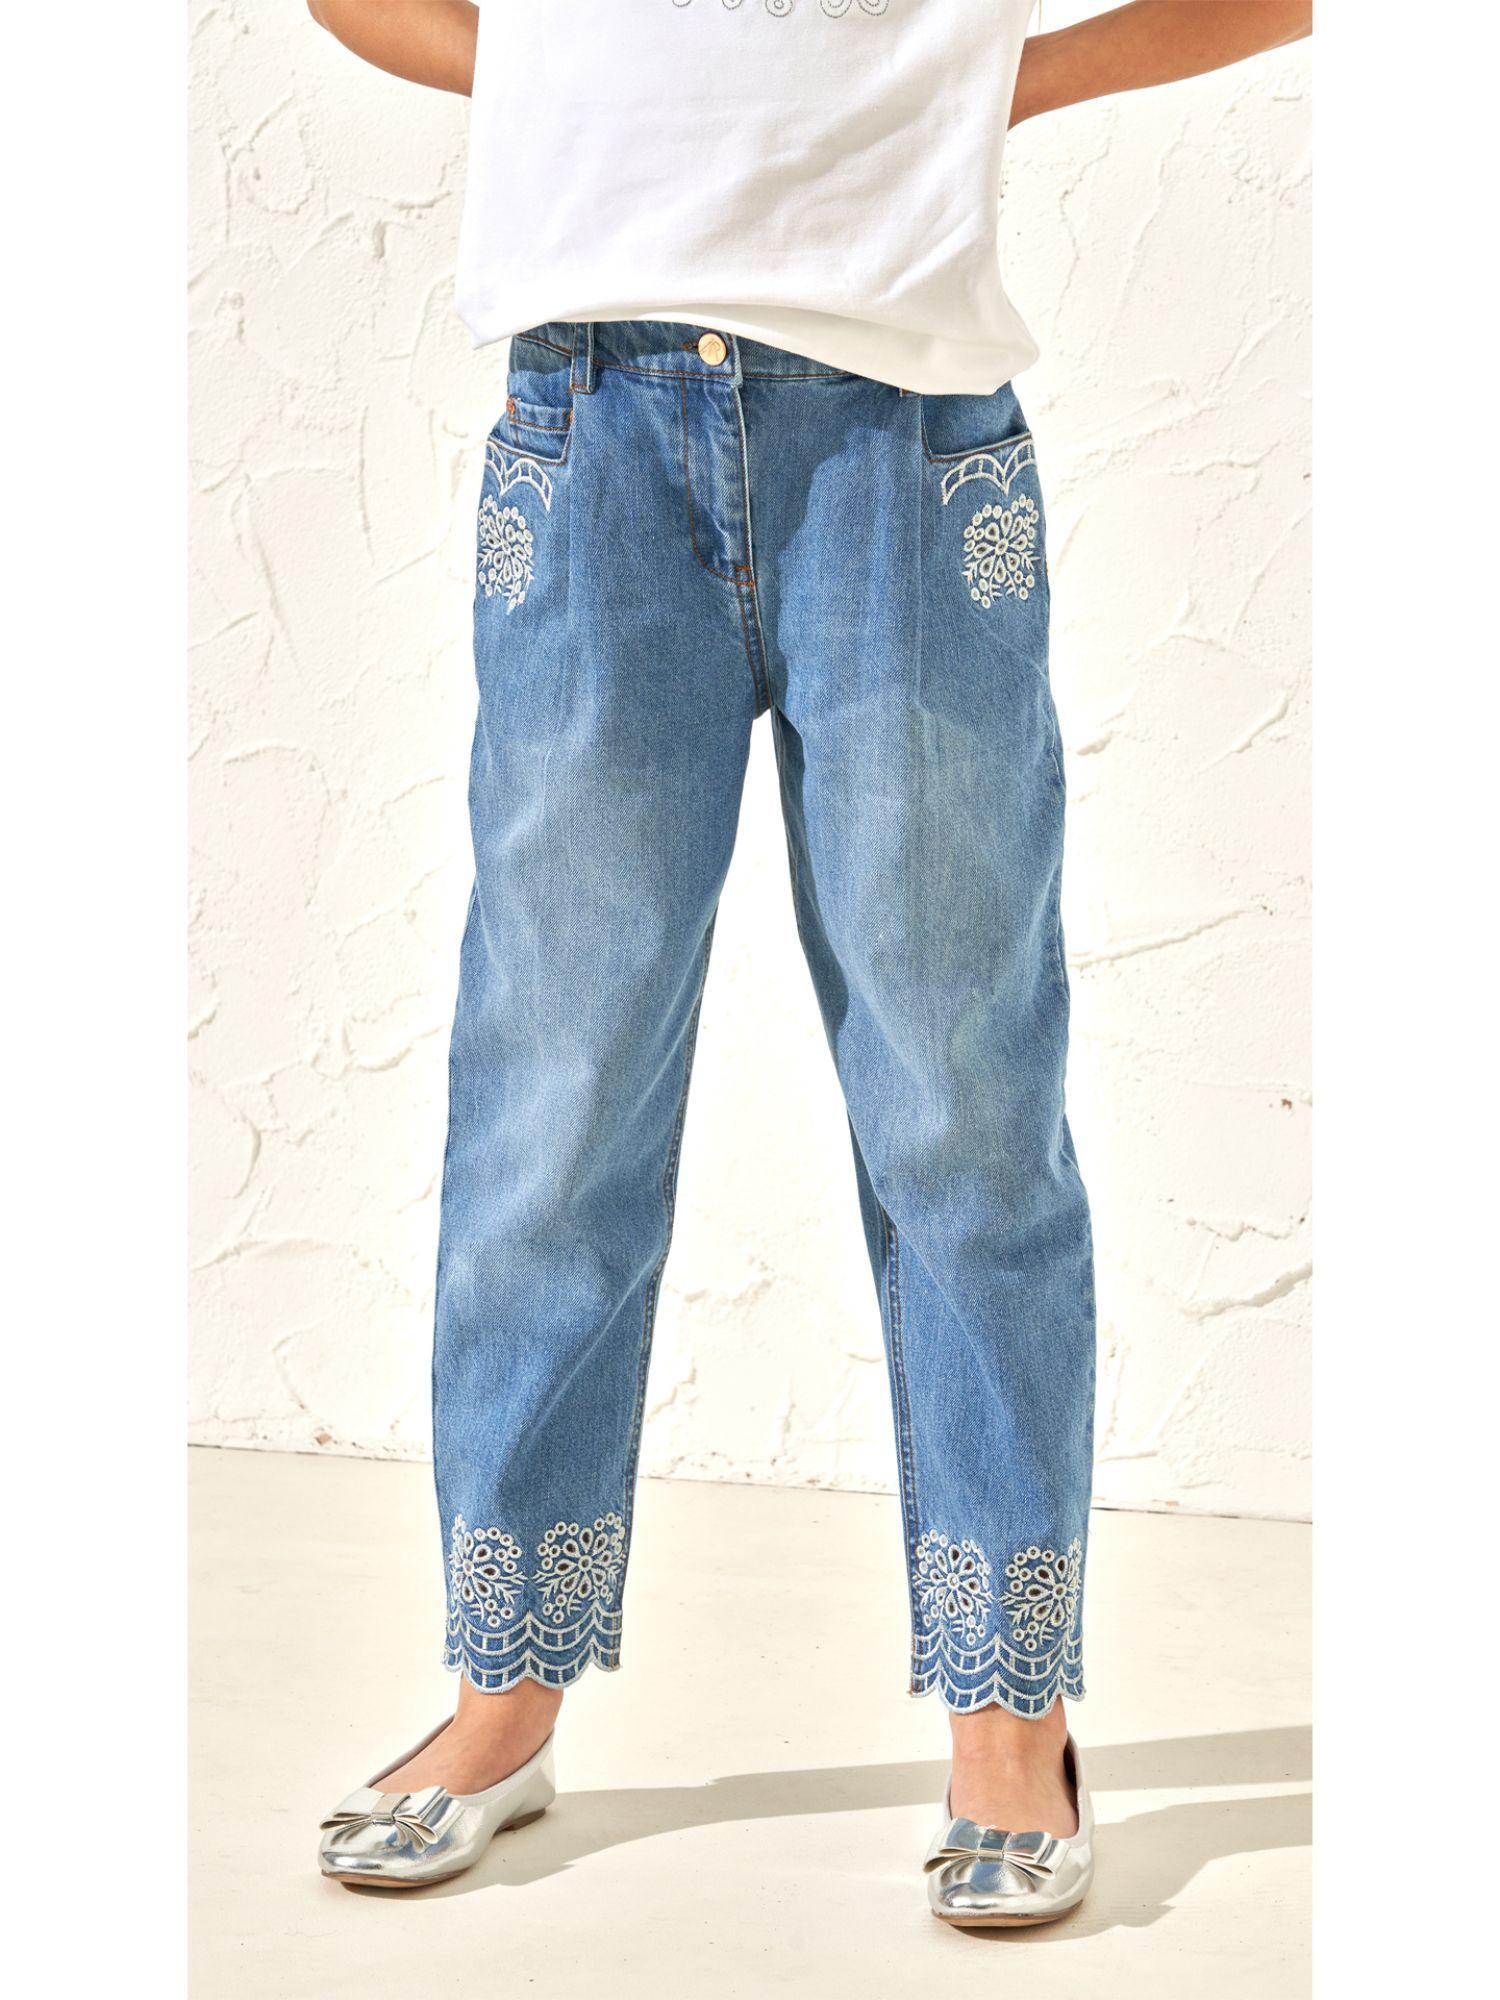 embroidered blue jeans